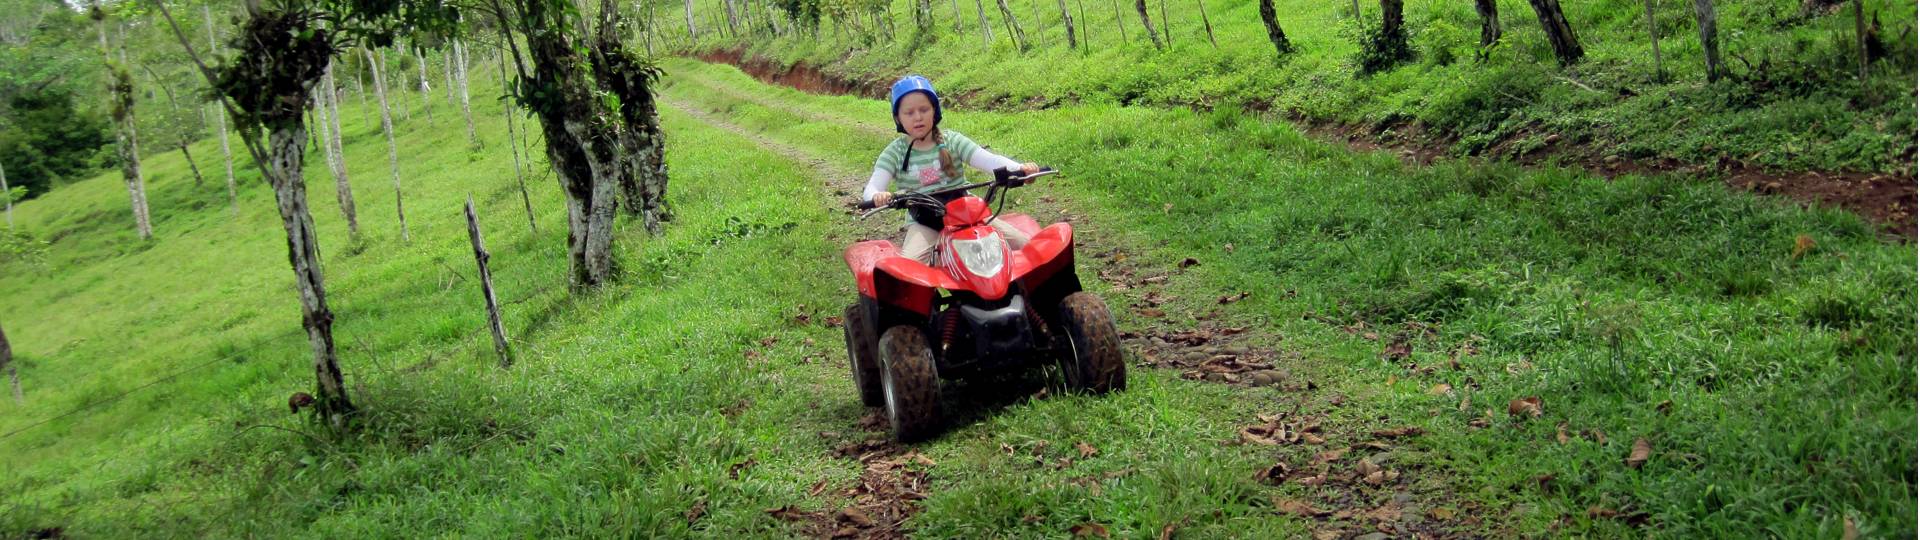 Serendipity Adventures ATV ride with younger girl riding solo